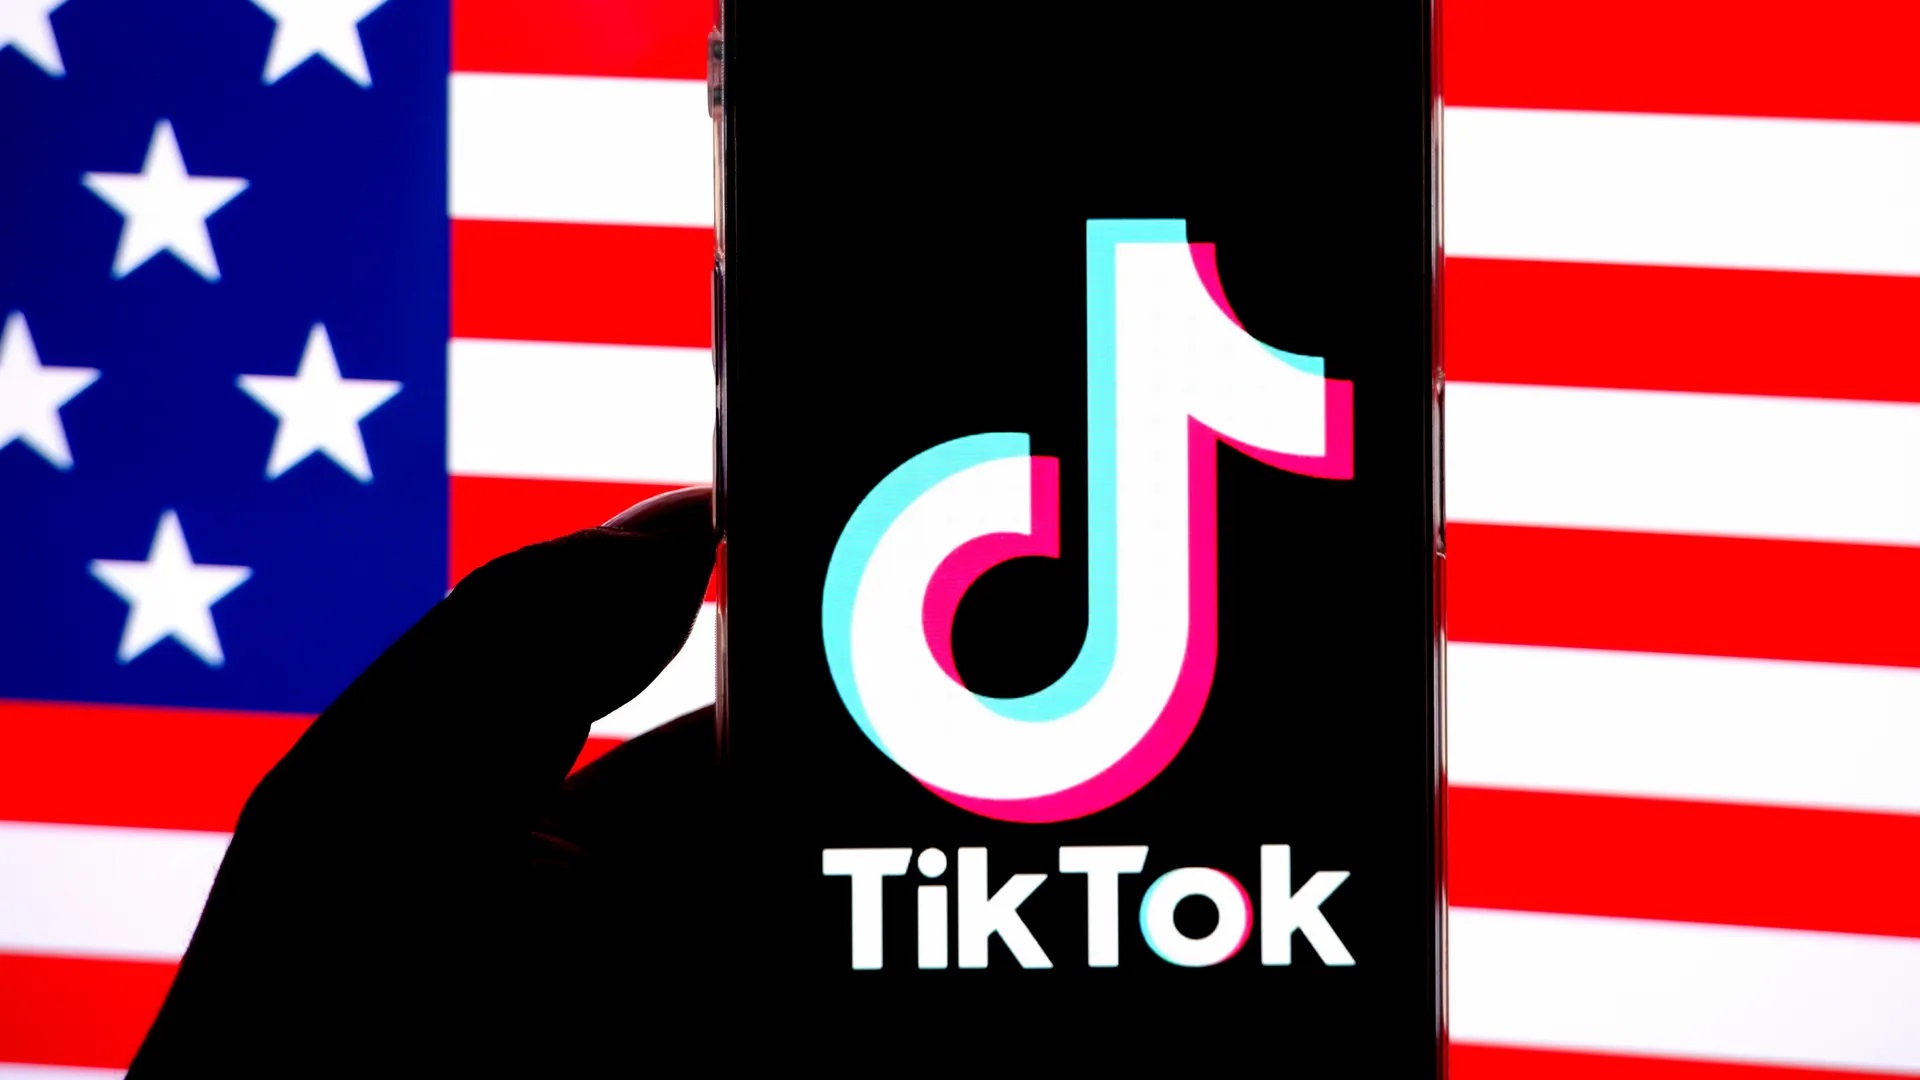 TikTok has filed a retaliatory lawsuit against the U.S. government in court